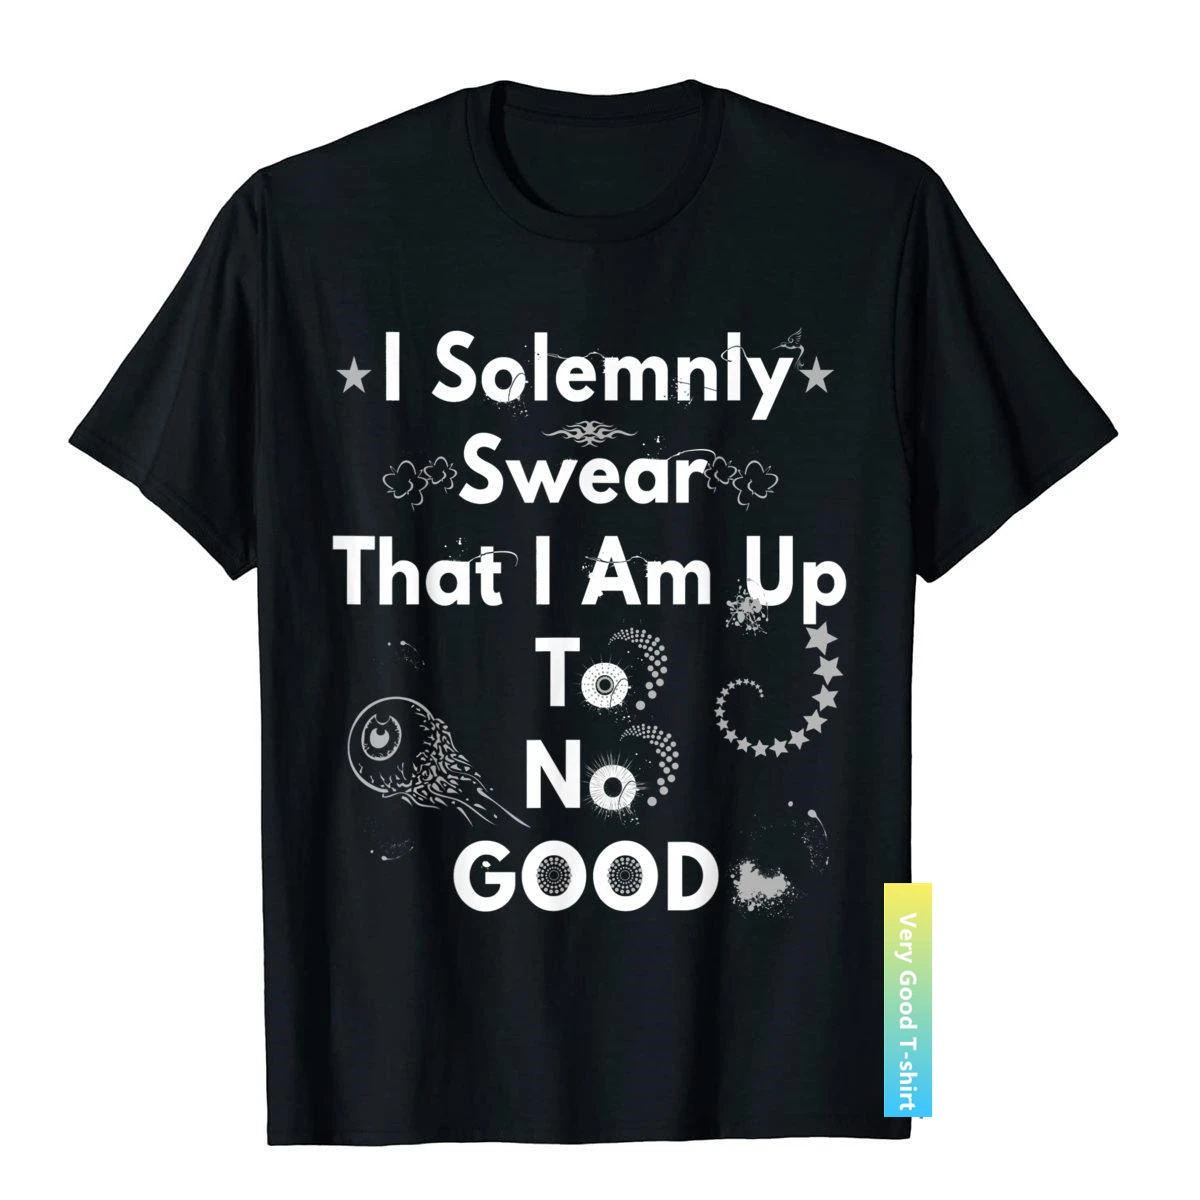 

I Solemnly Swear That I Am Up To No Good Funny Quote T-Shirt Family Family Tops Shirt Cotton T Shirts For Men Design